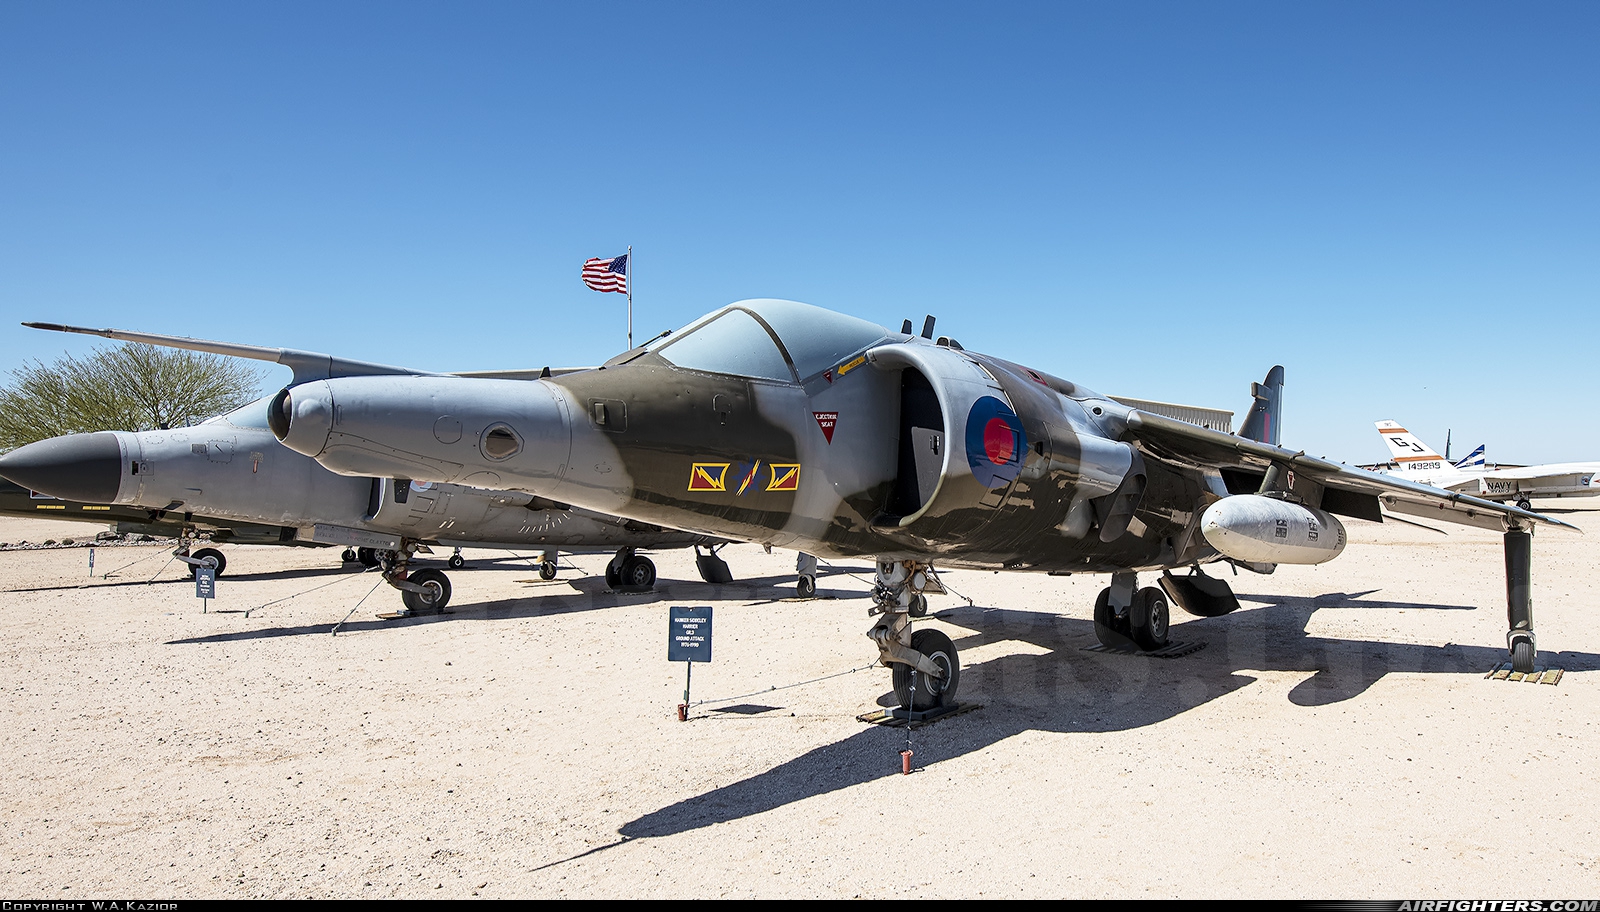 UK - Air Force Hawker Siddeley Harrier GR.3 XV804 at Tucson - Pima Air and Space Museum, USA